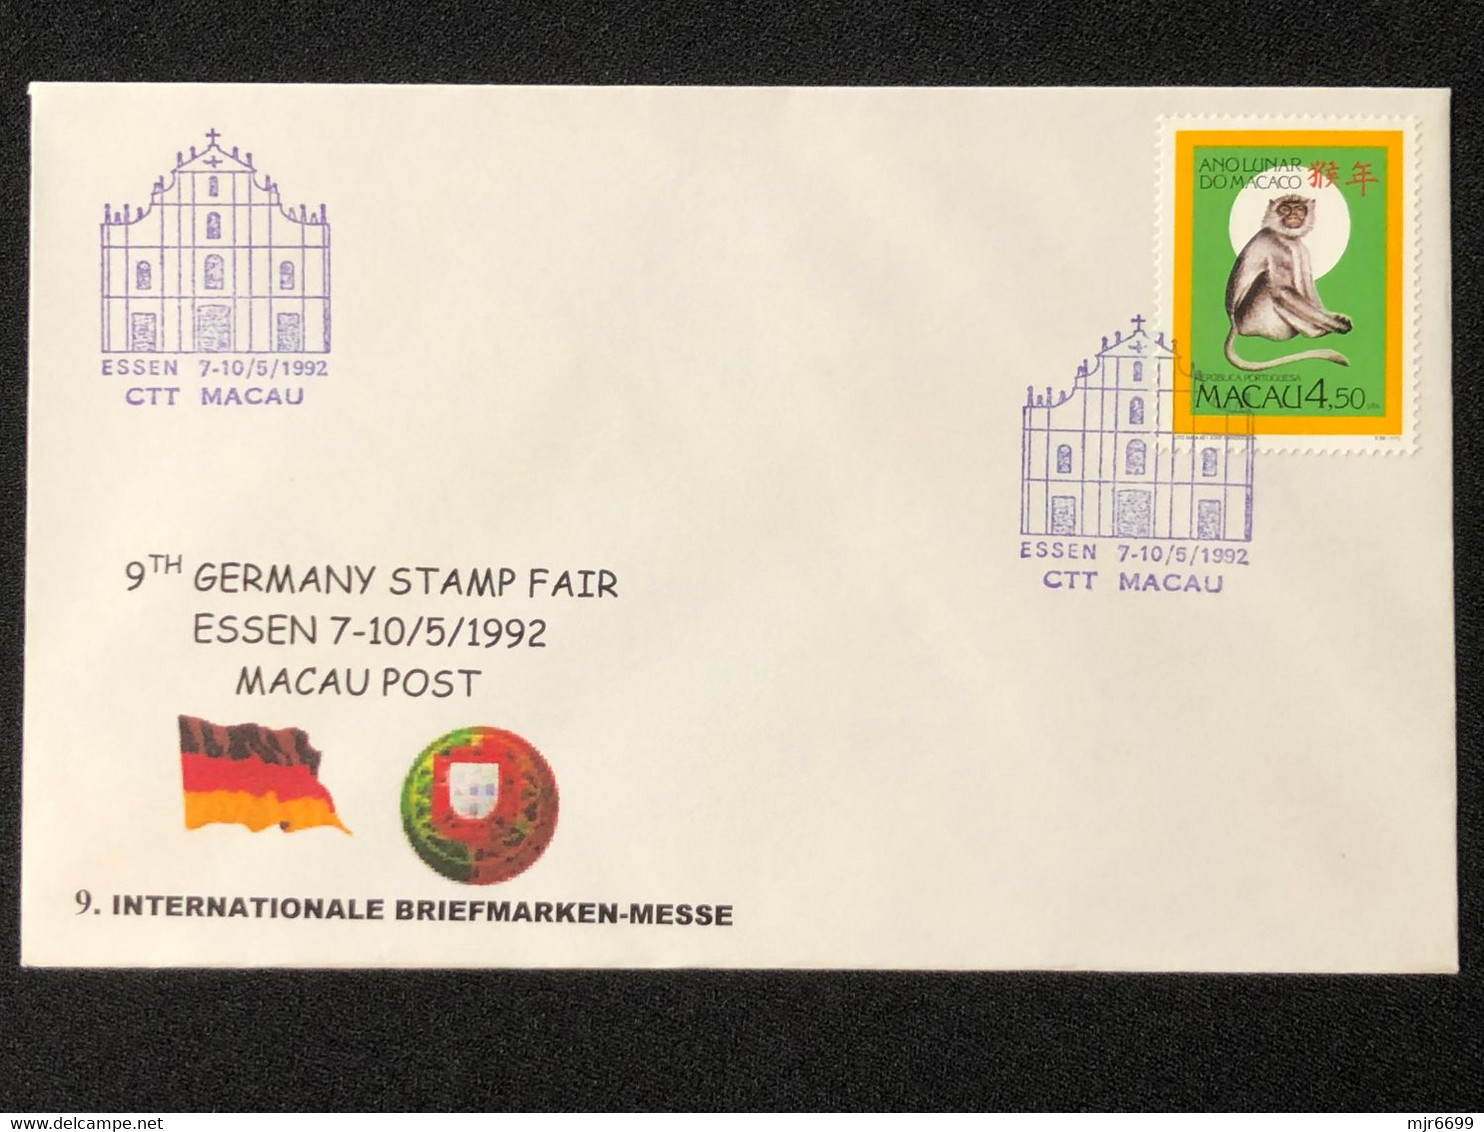 MACAU 9TH GERMANY STAMP FAIR 92 ESSEN COMMEMORATIVE CANCELLATION ON COVER - Covers & Documents